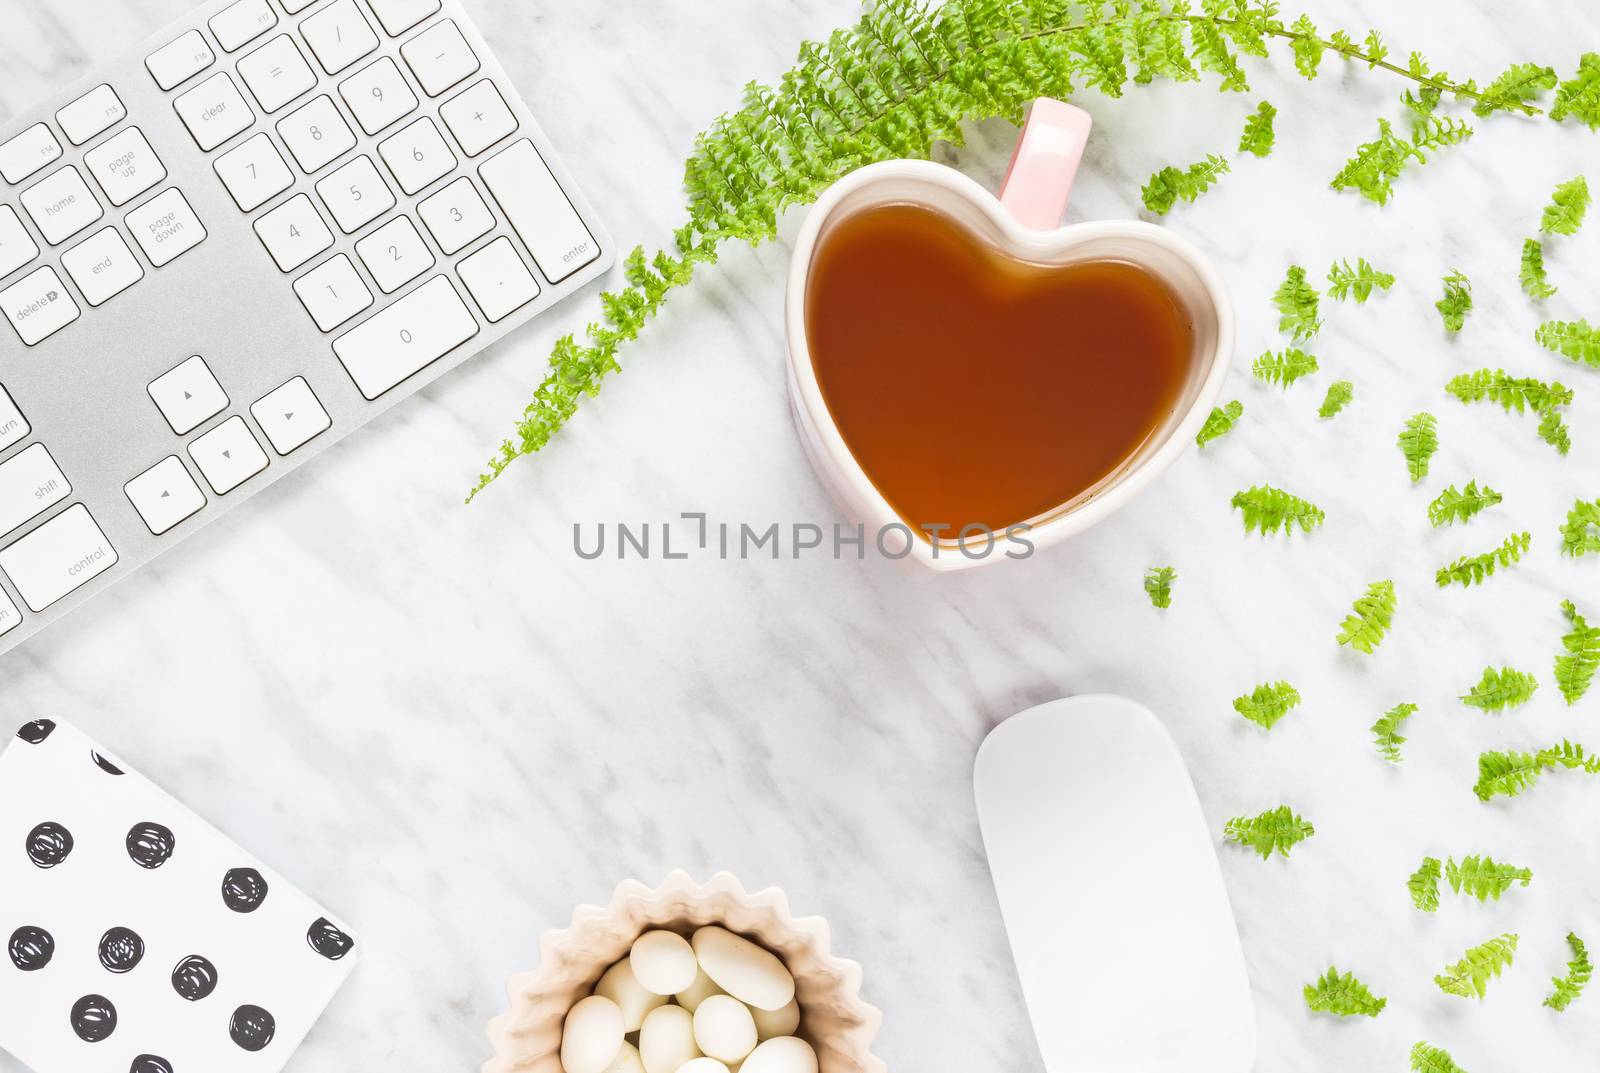 Beautiful modern home office workspace with heart-shaped teacup. Flat lay composition on marble background, with copy space in the center.